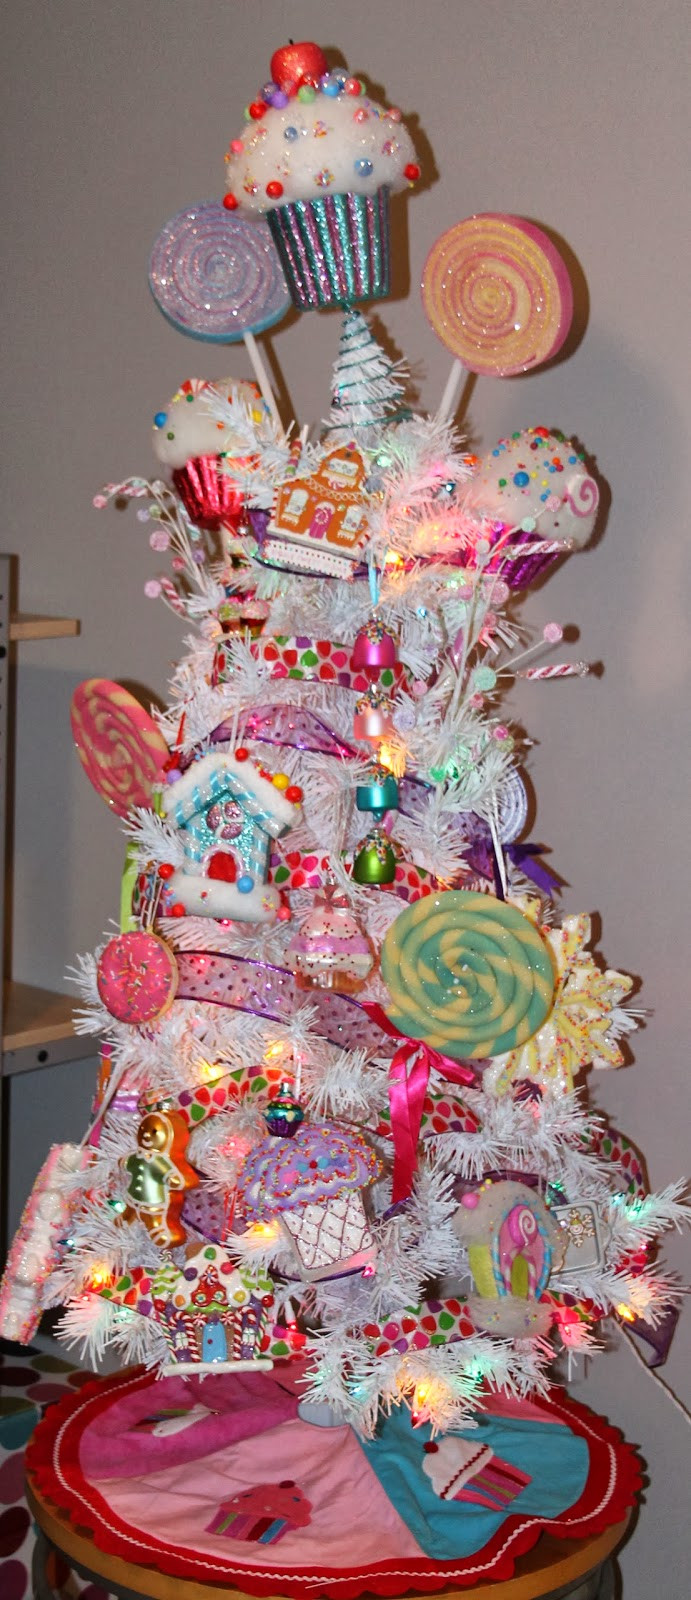 Christmas Candy Decorations
 Our Styled Suburban Life 2nd Annual Cupcake Tree